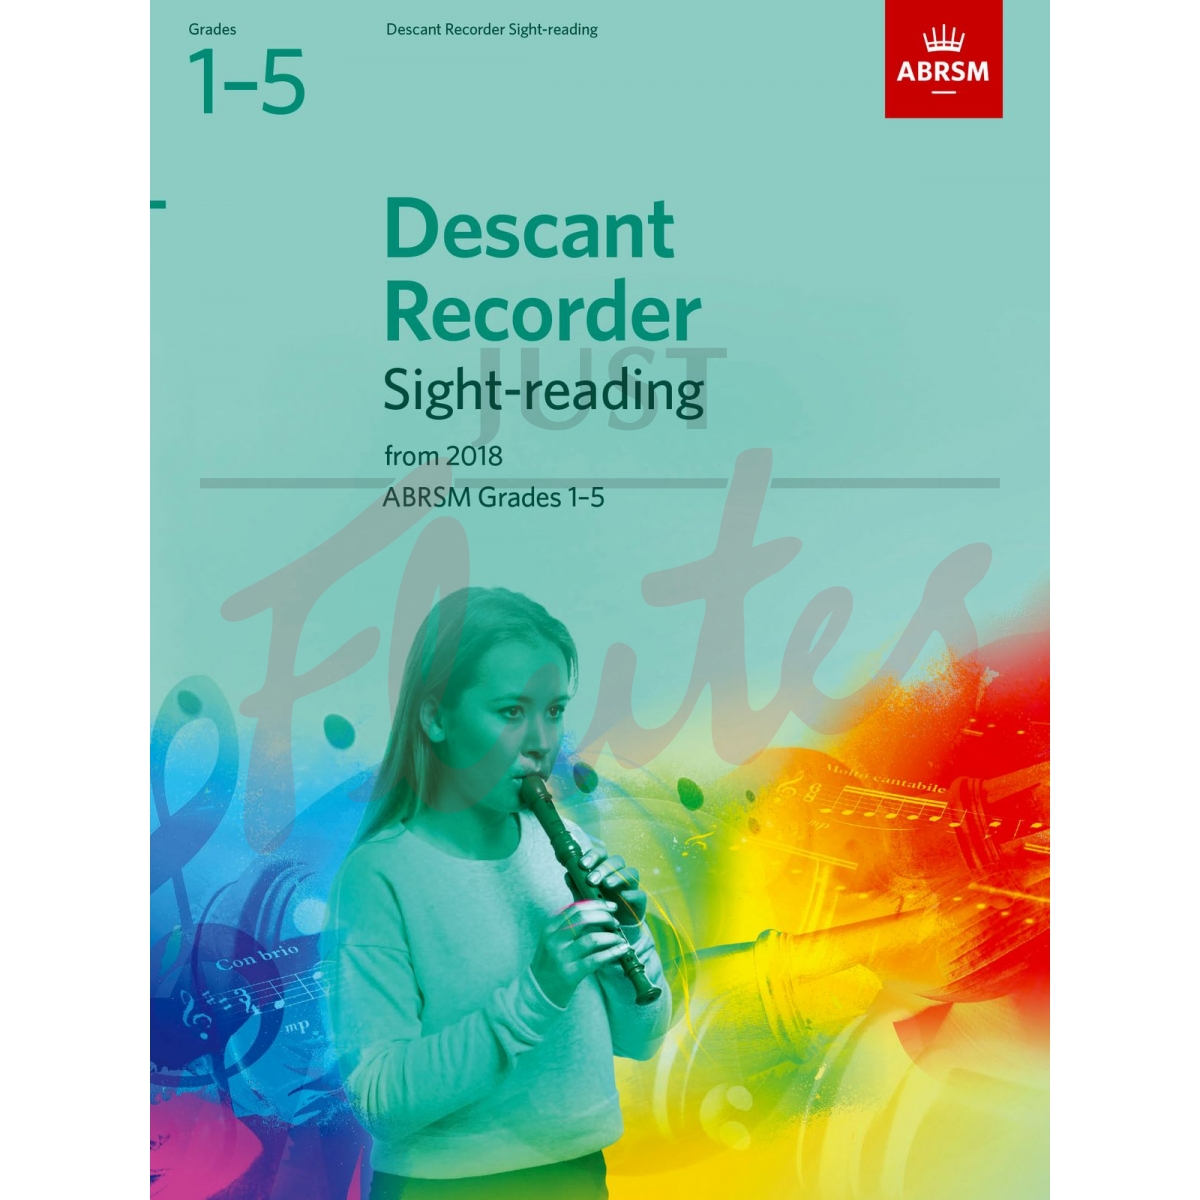 Sight-Reading Tests Grades 1-5 (from 2018) [Descant Recorder]